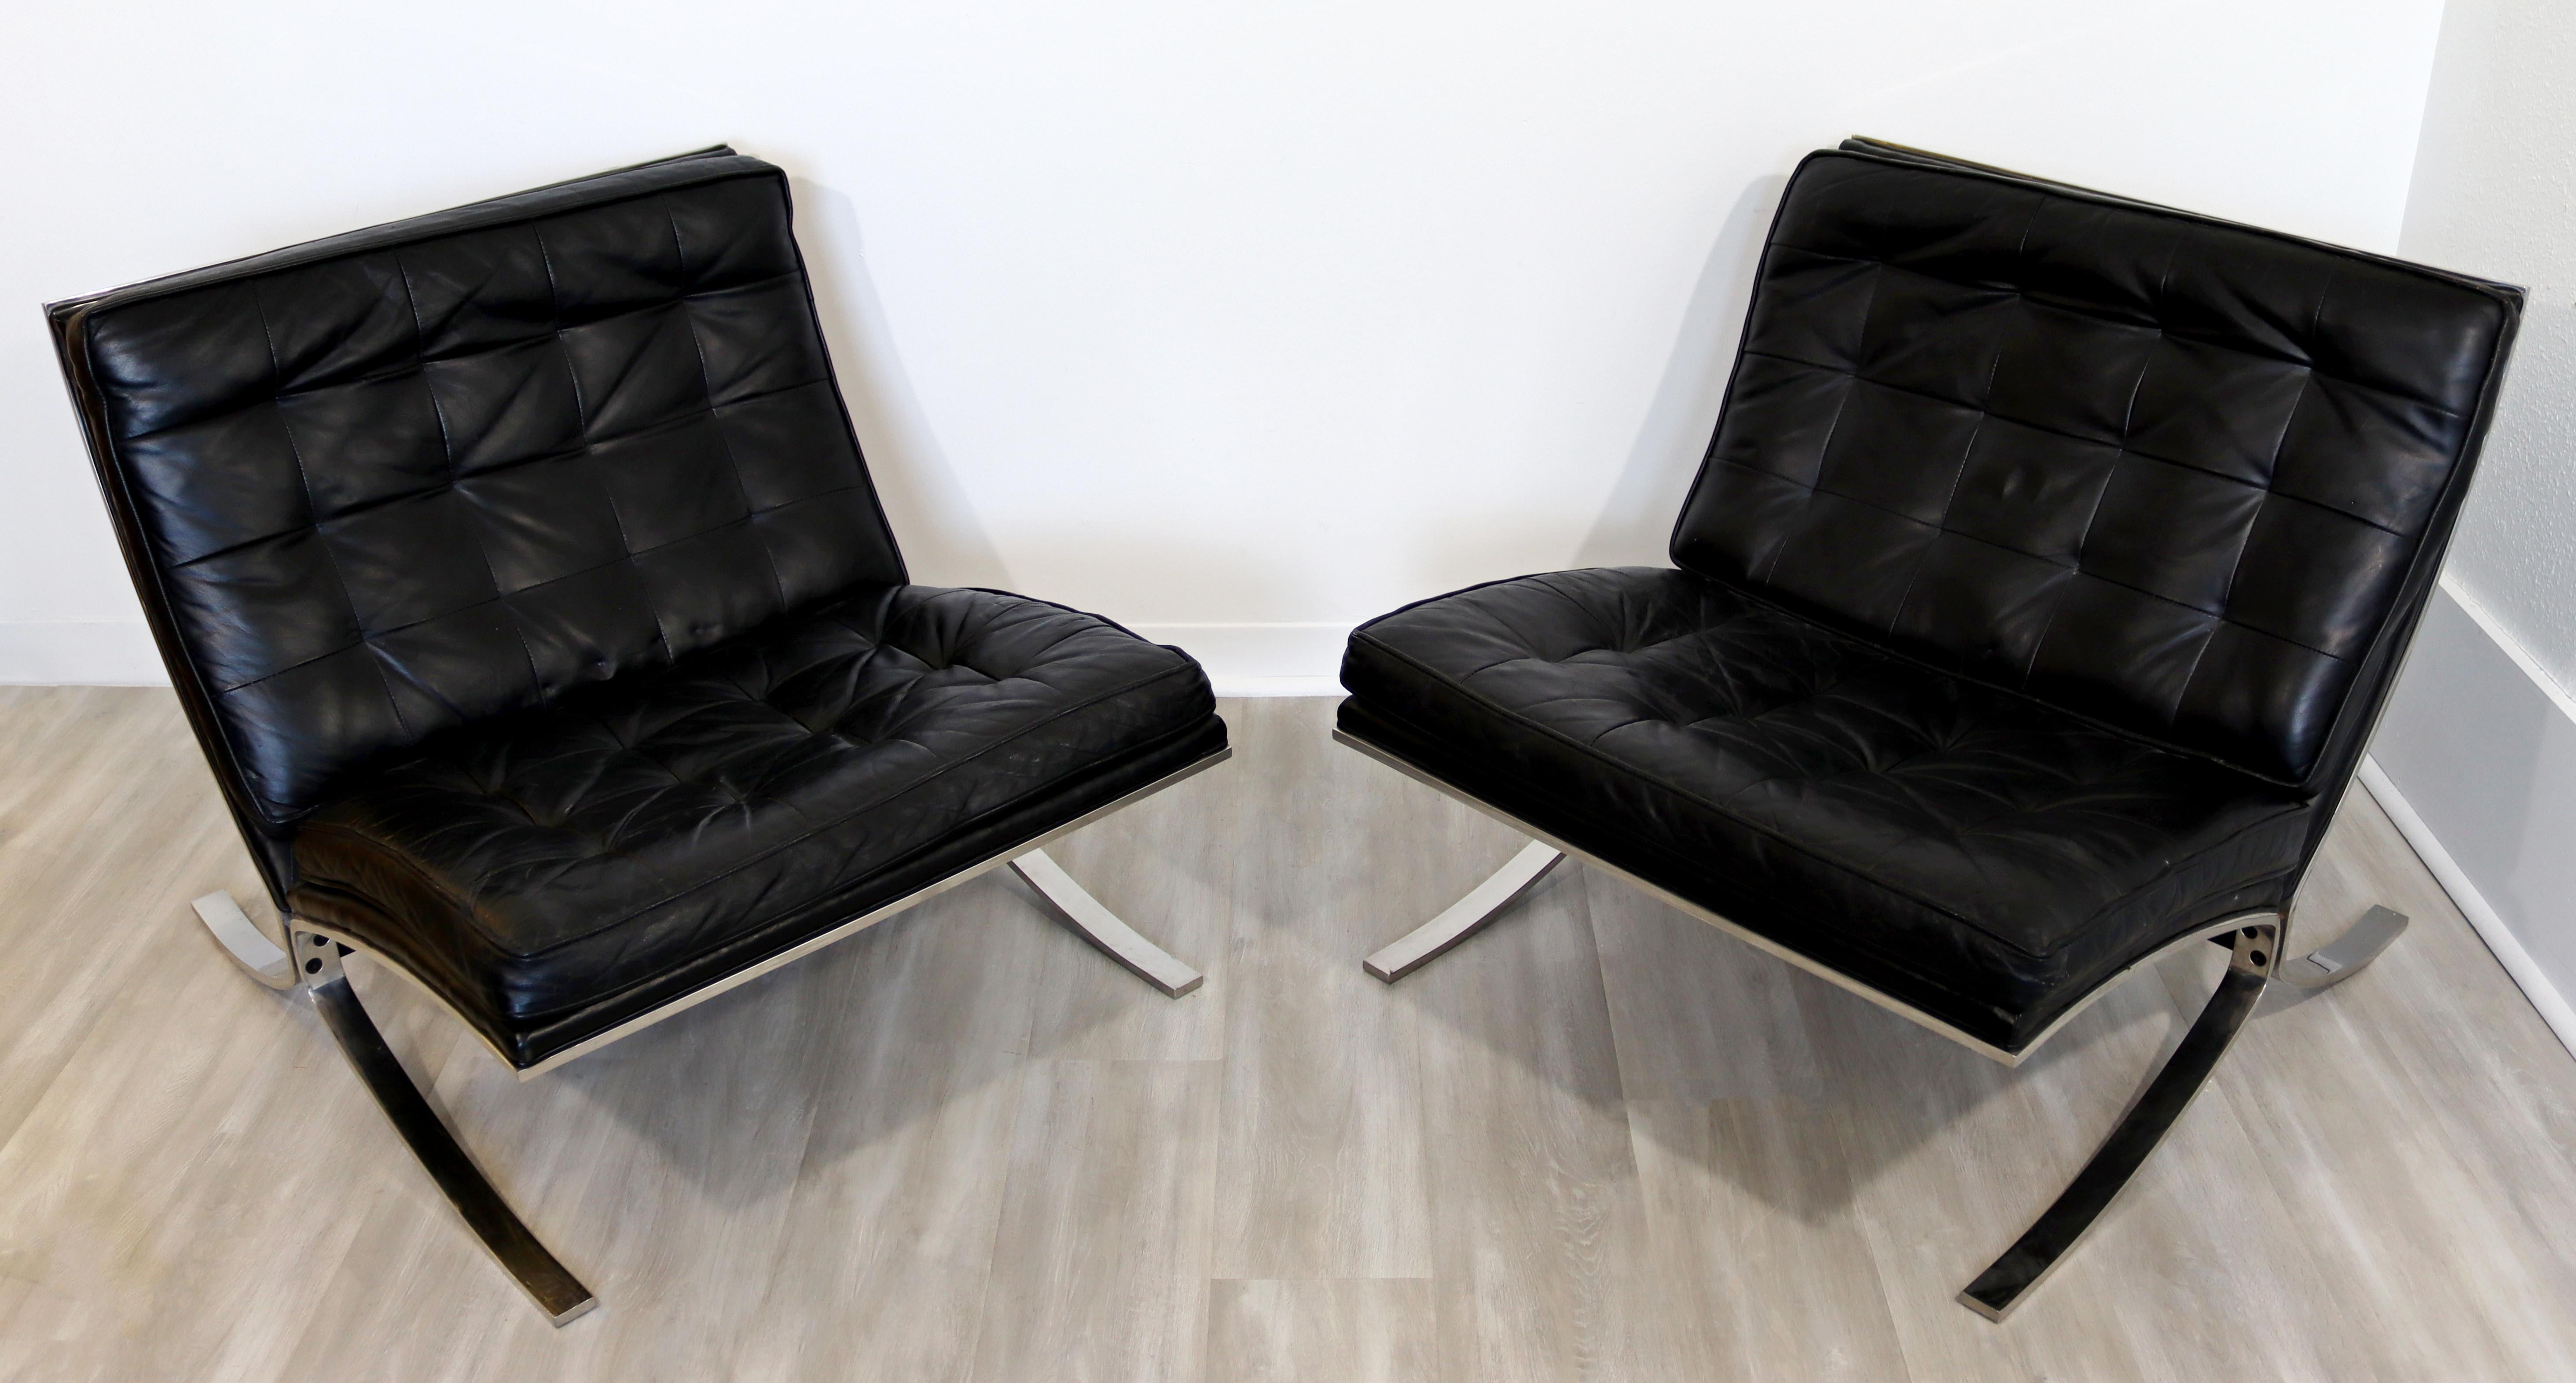 For your consideration is a lux looking pair of Barcelona style lounge chairs, by Mies Van der Rohe for Knoll style, circa the 1970s. In very good vintage condition, with some obvious ware to the leather. The dimensions are 29